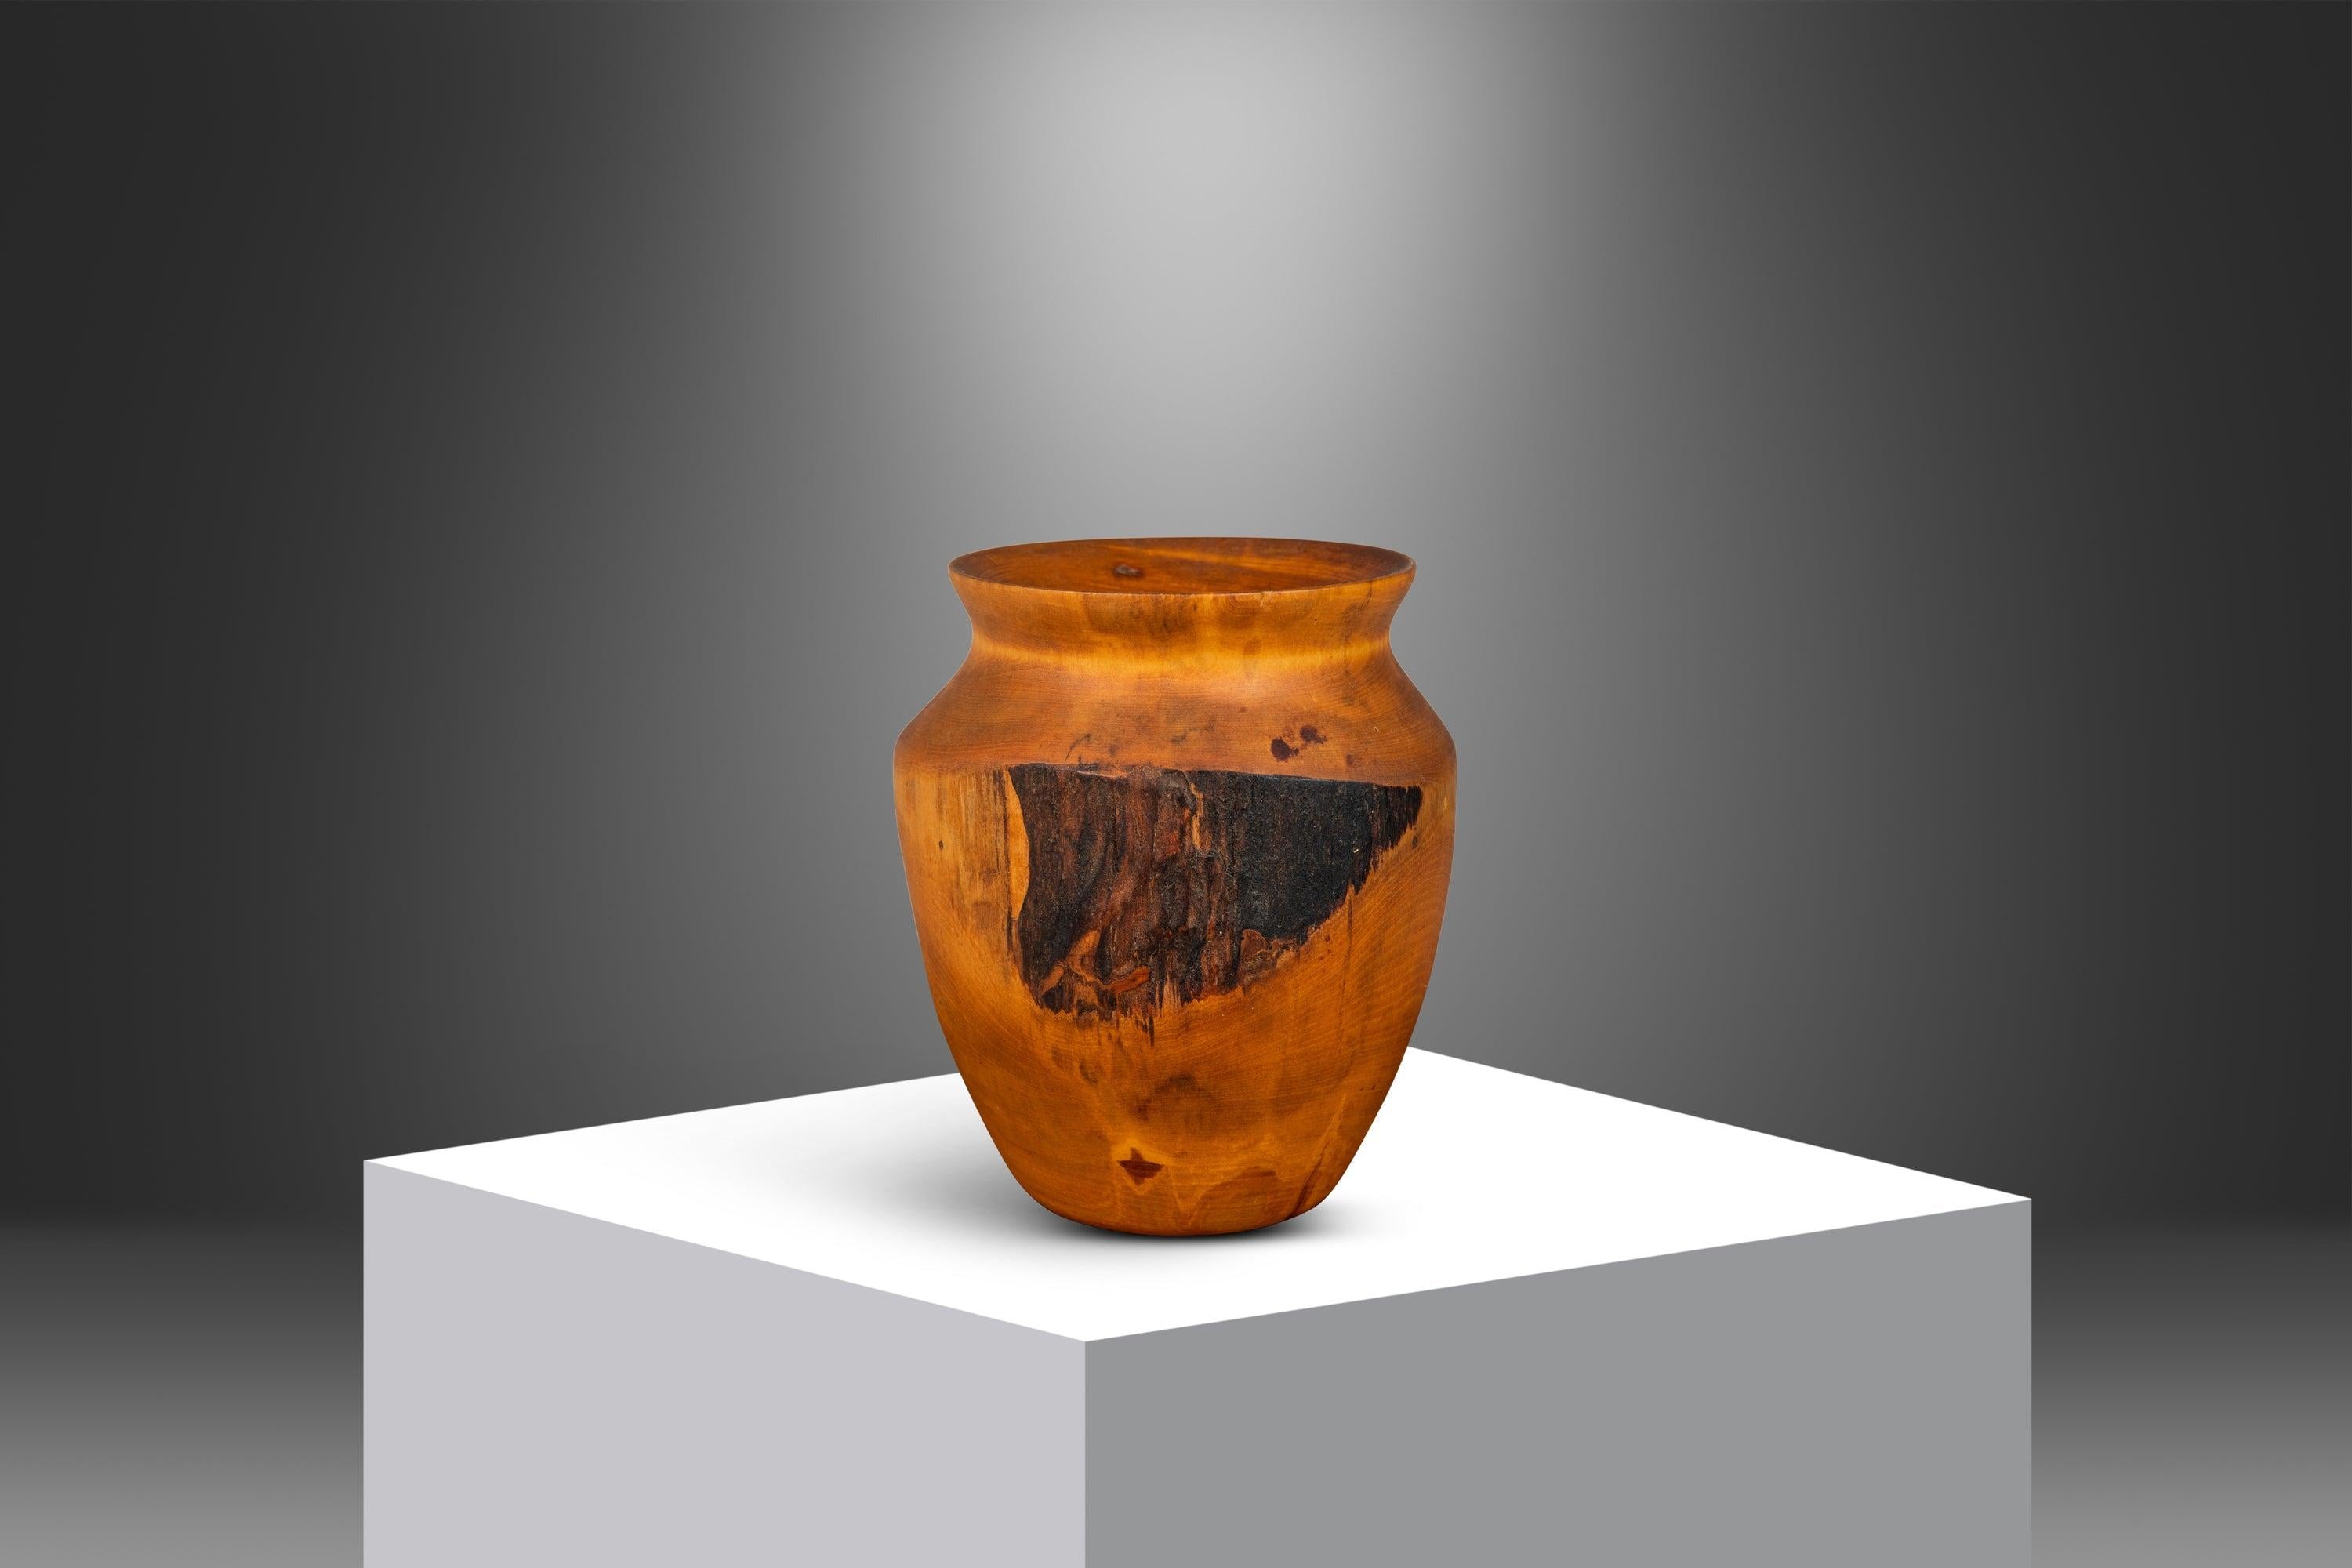 Handmade by the renowned wood-worker Joseph Thompson, this wood-turned vase is absolutely exquisite. Carved out of solid birch from Montana, this gorgeous vase boasts exquisite woodgrains and craftsmanship synonymous with Thompson's work. Make it